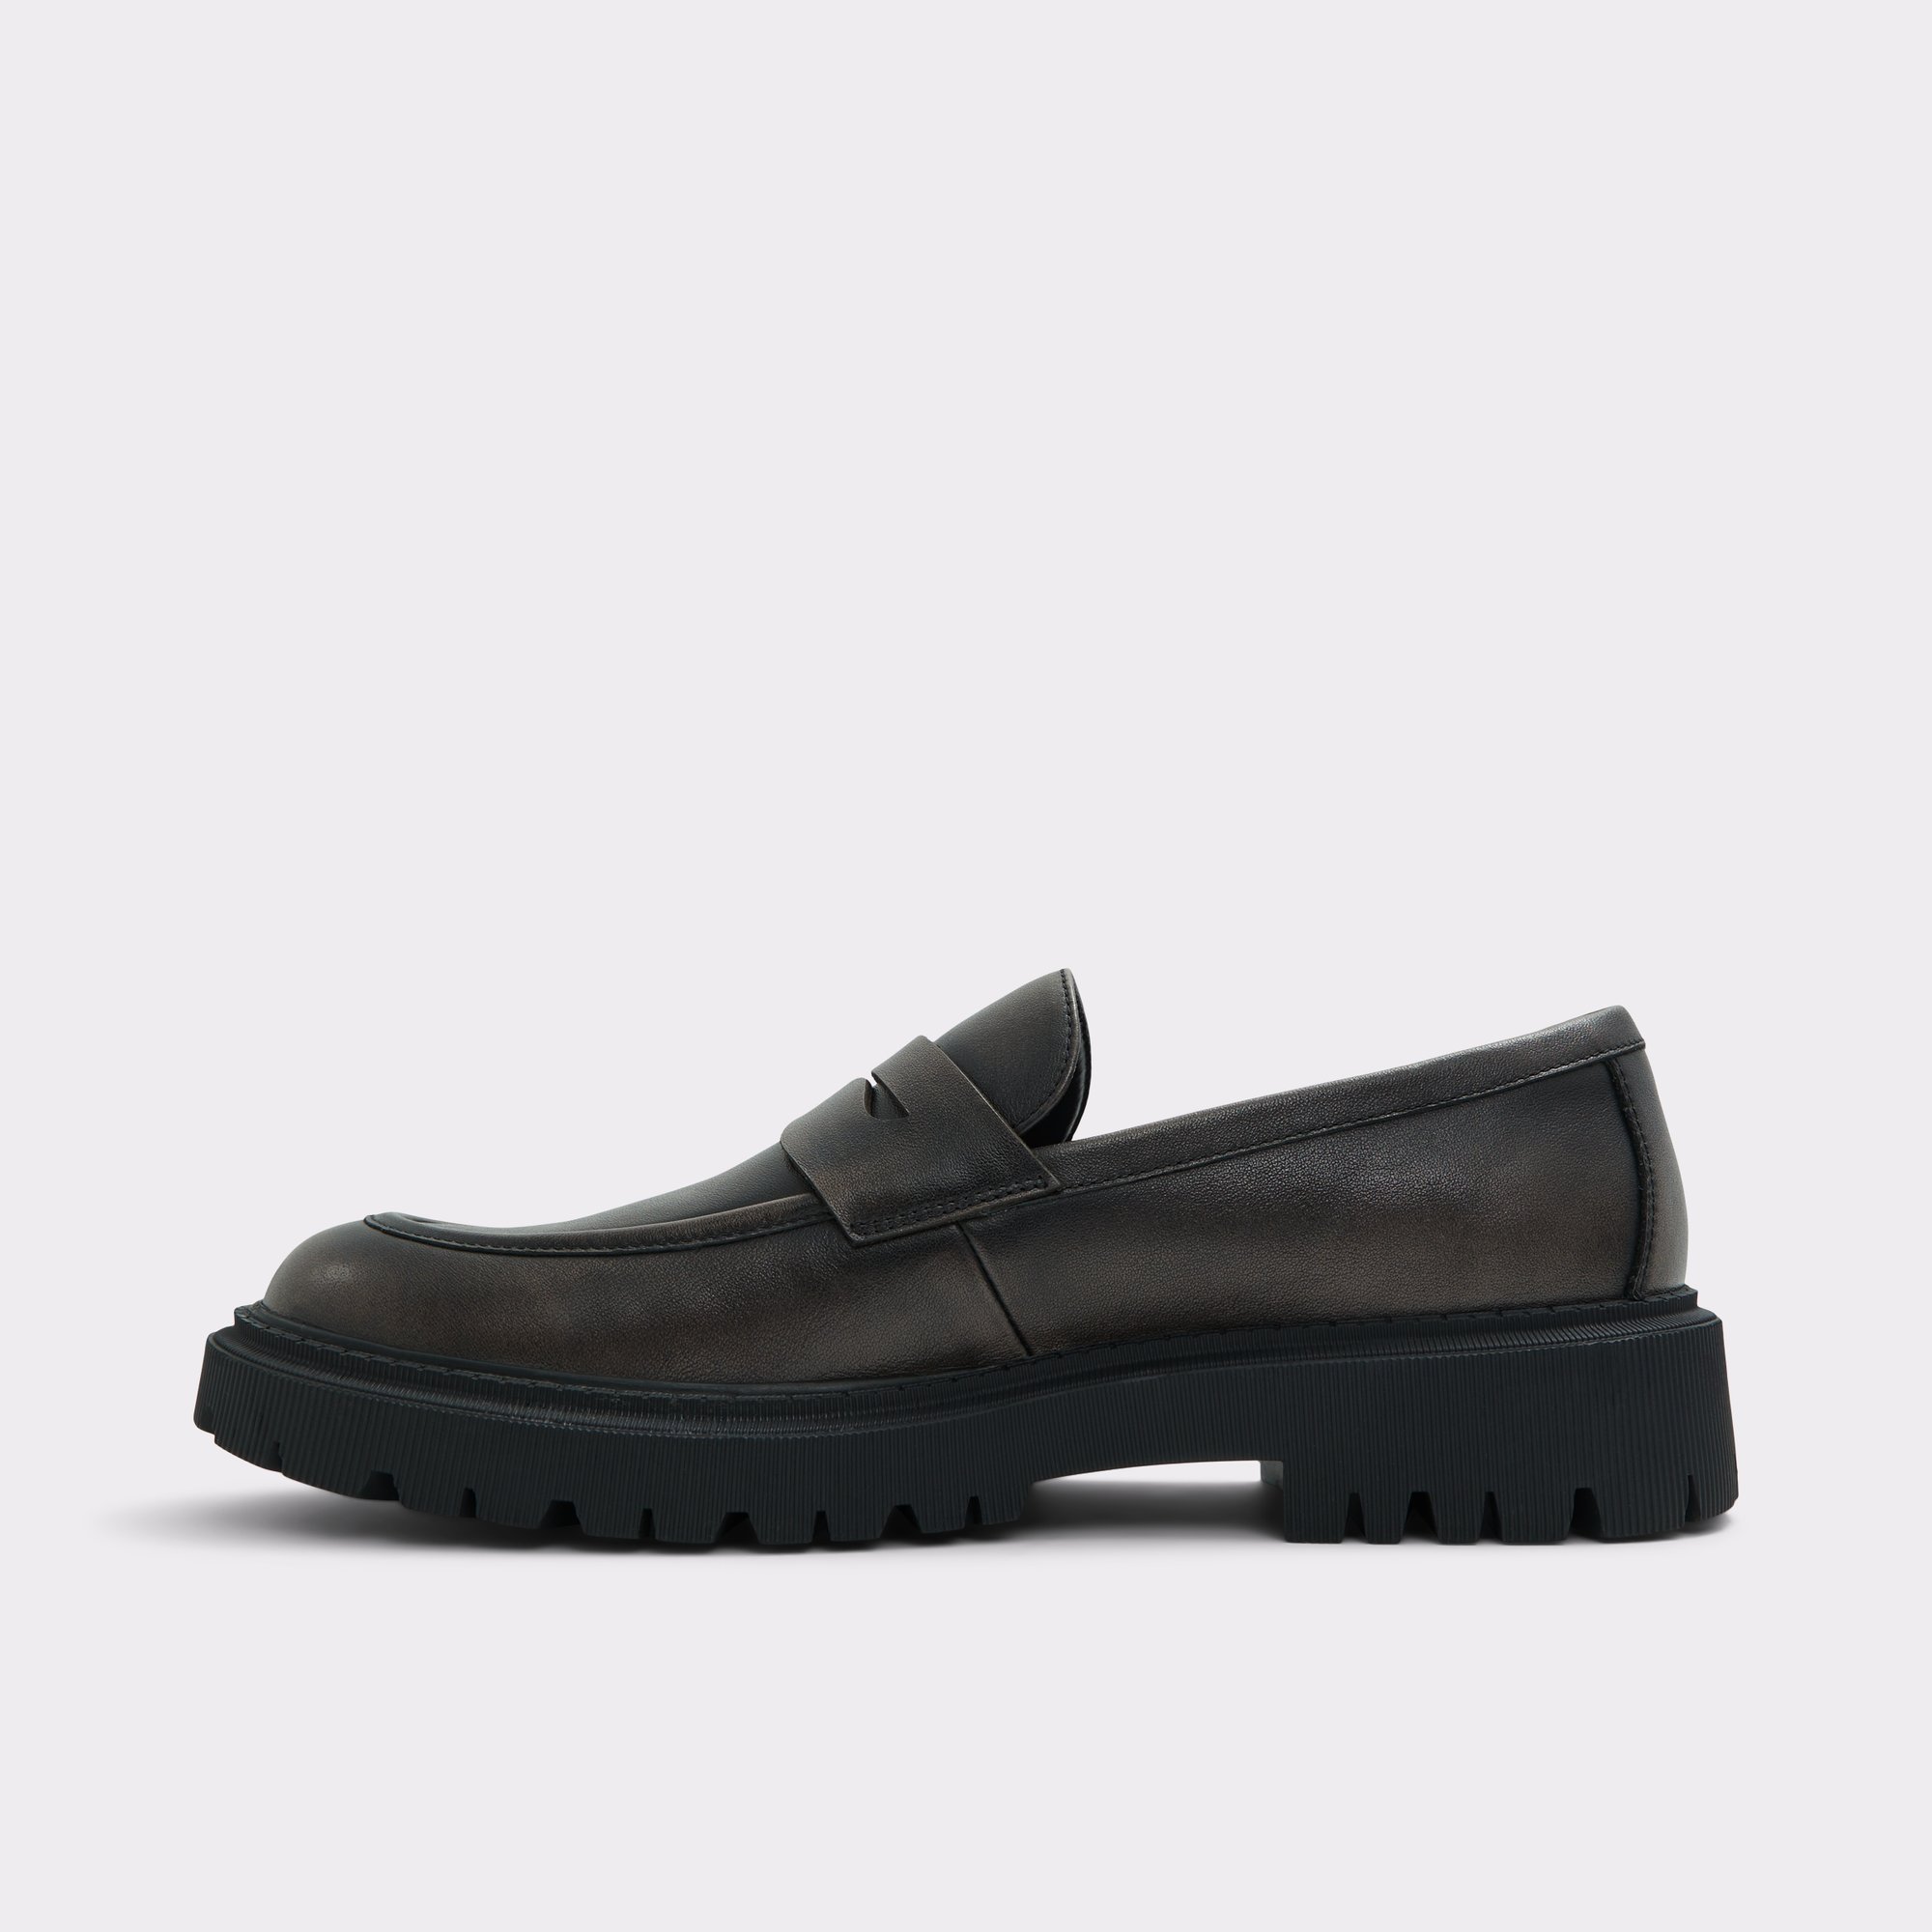 Exeter Black Leather Distressed Men's Loafers & Slip-Ons | ALDO Canada